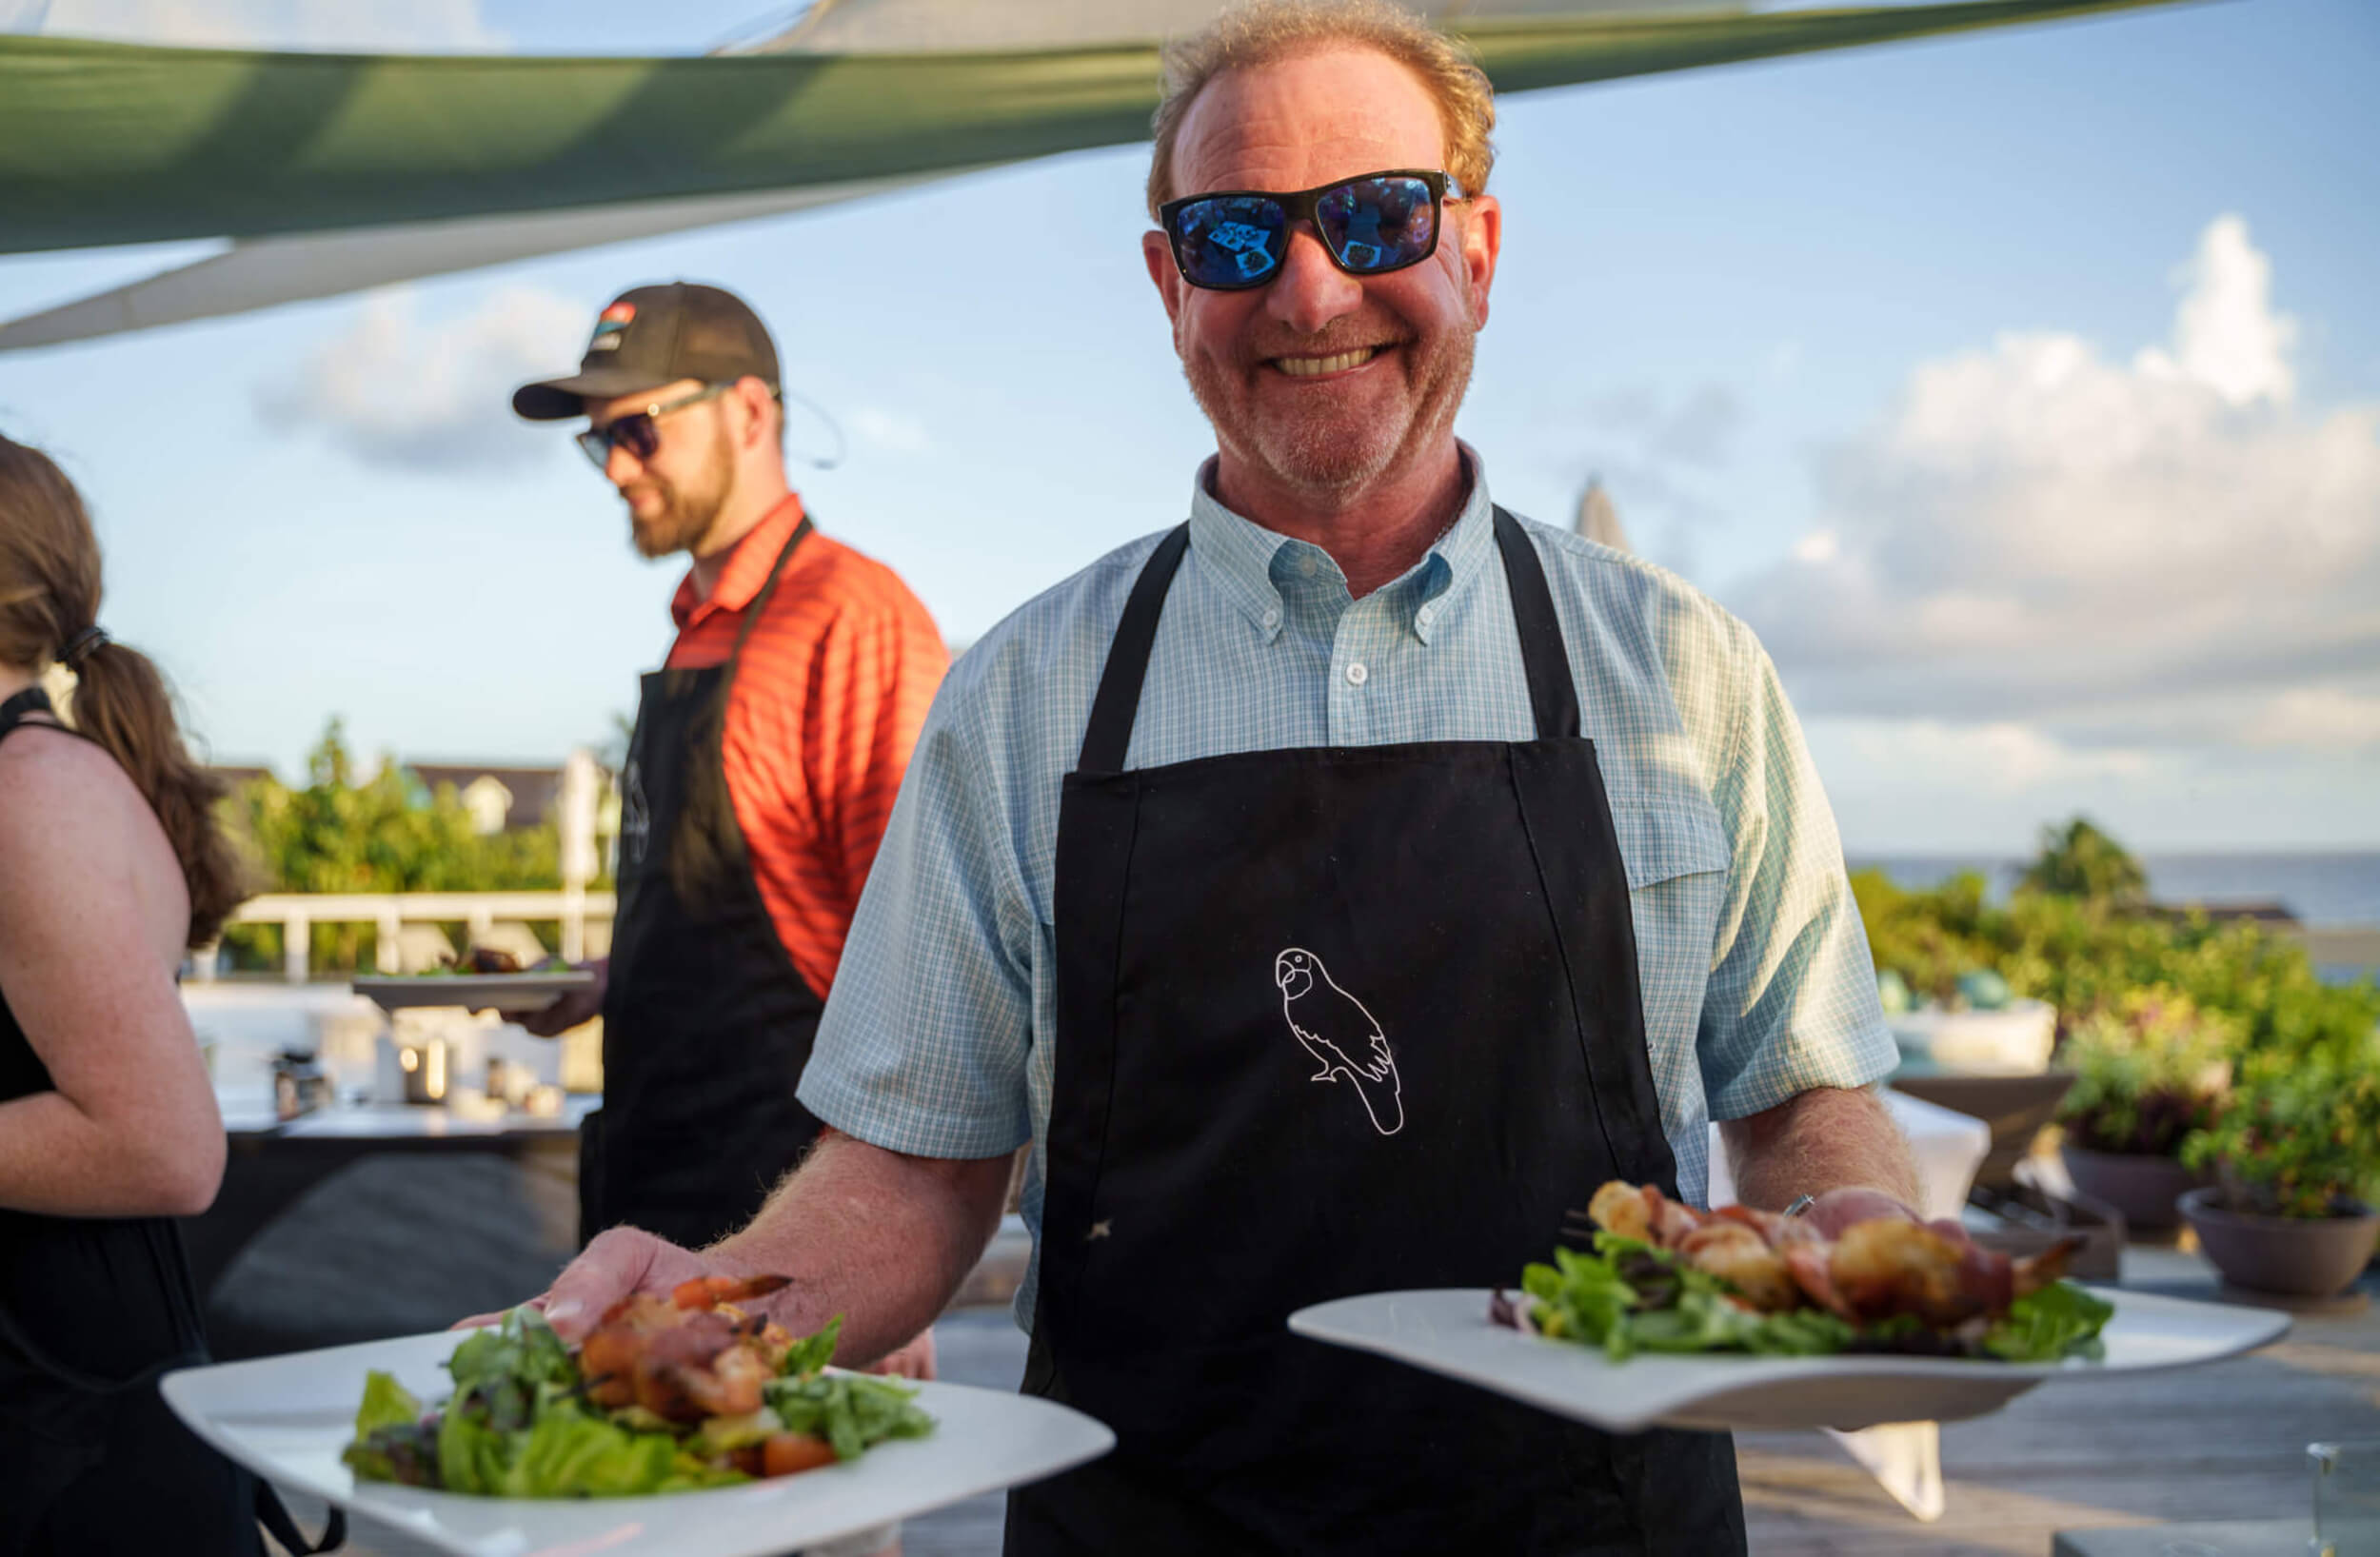 An Abaco Club member enjoying coastal life at a lobster fest event at The Abaco Club